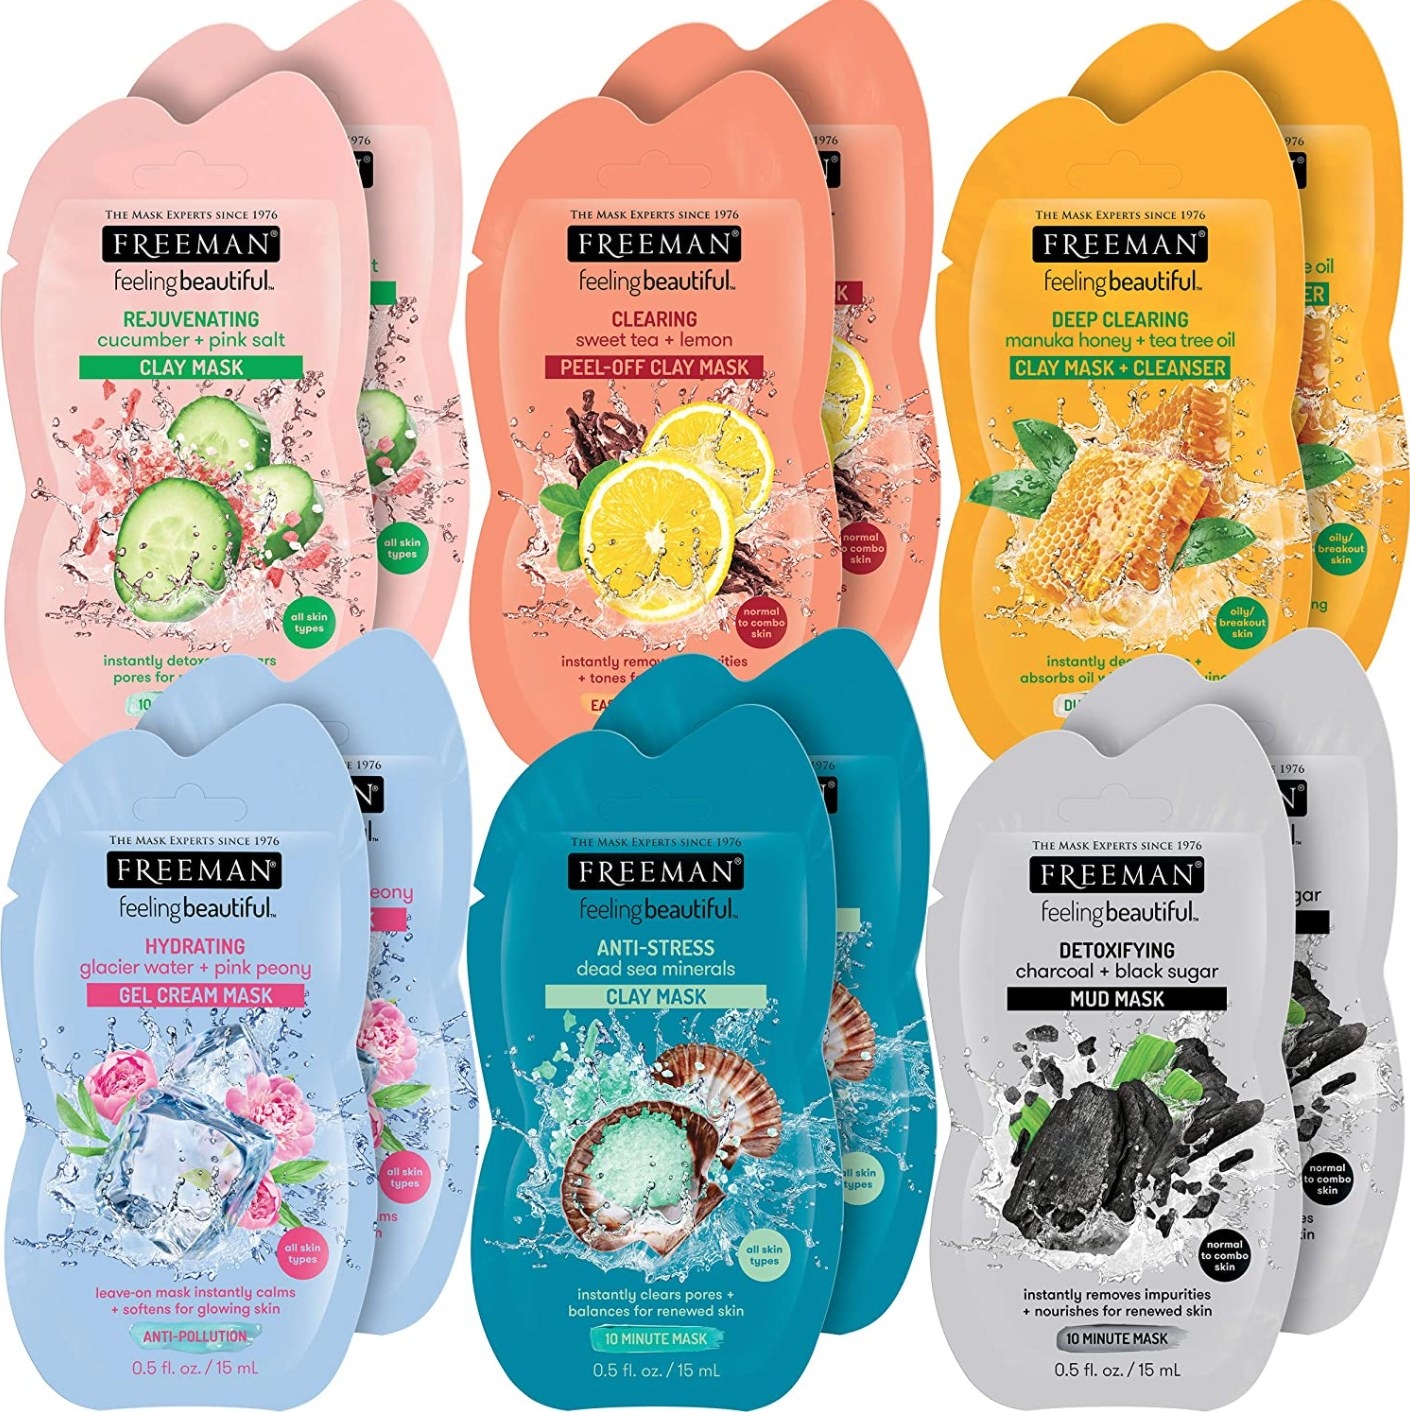 the full set of face masks with six different versions